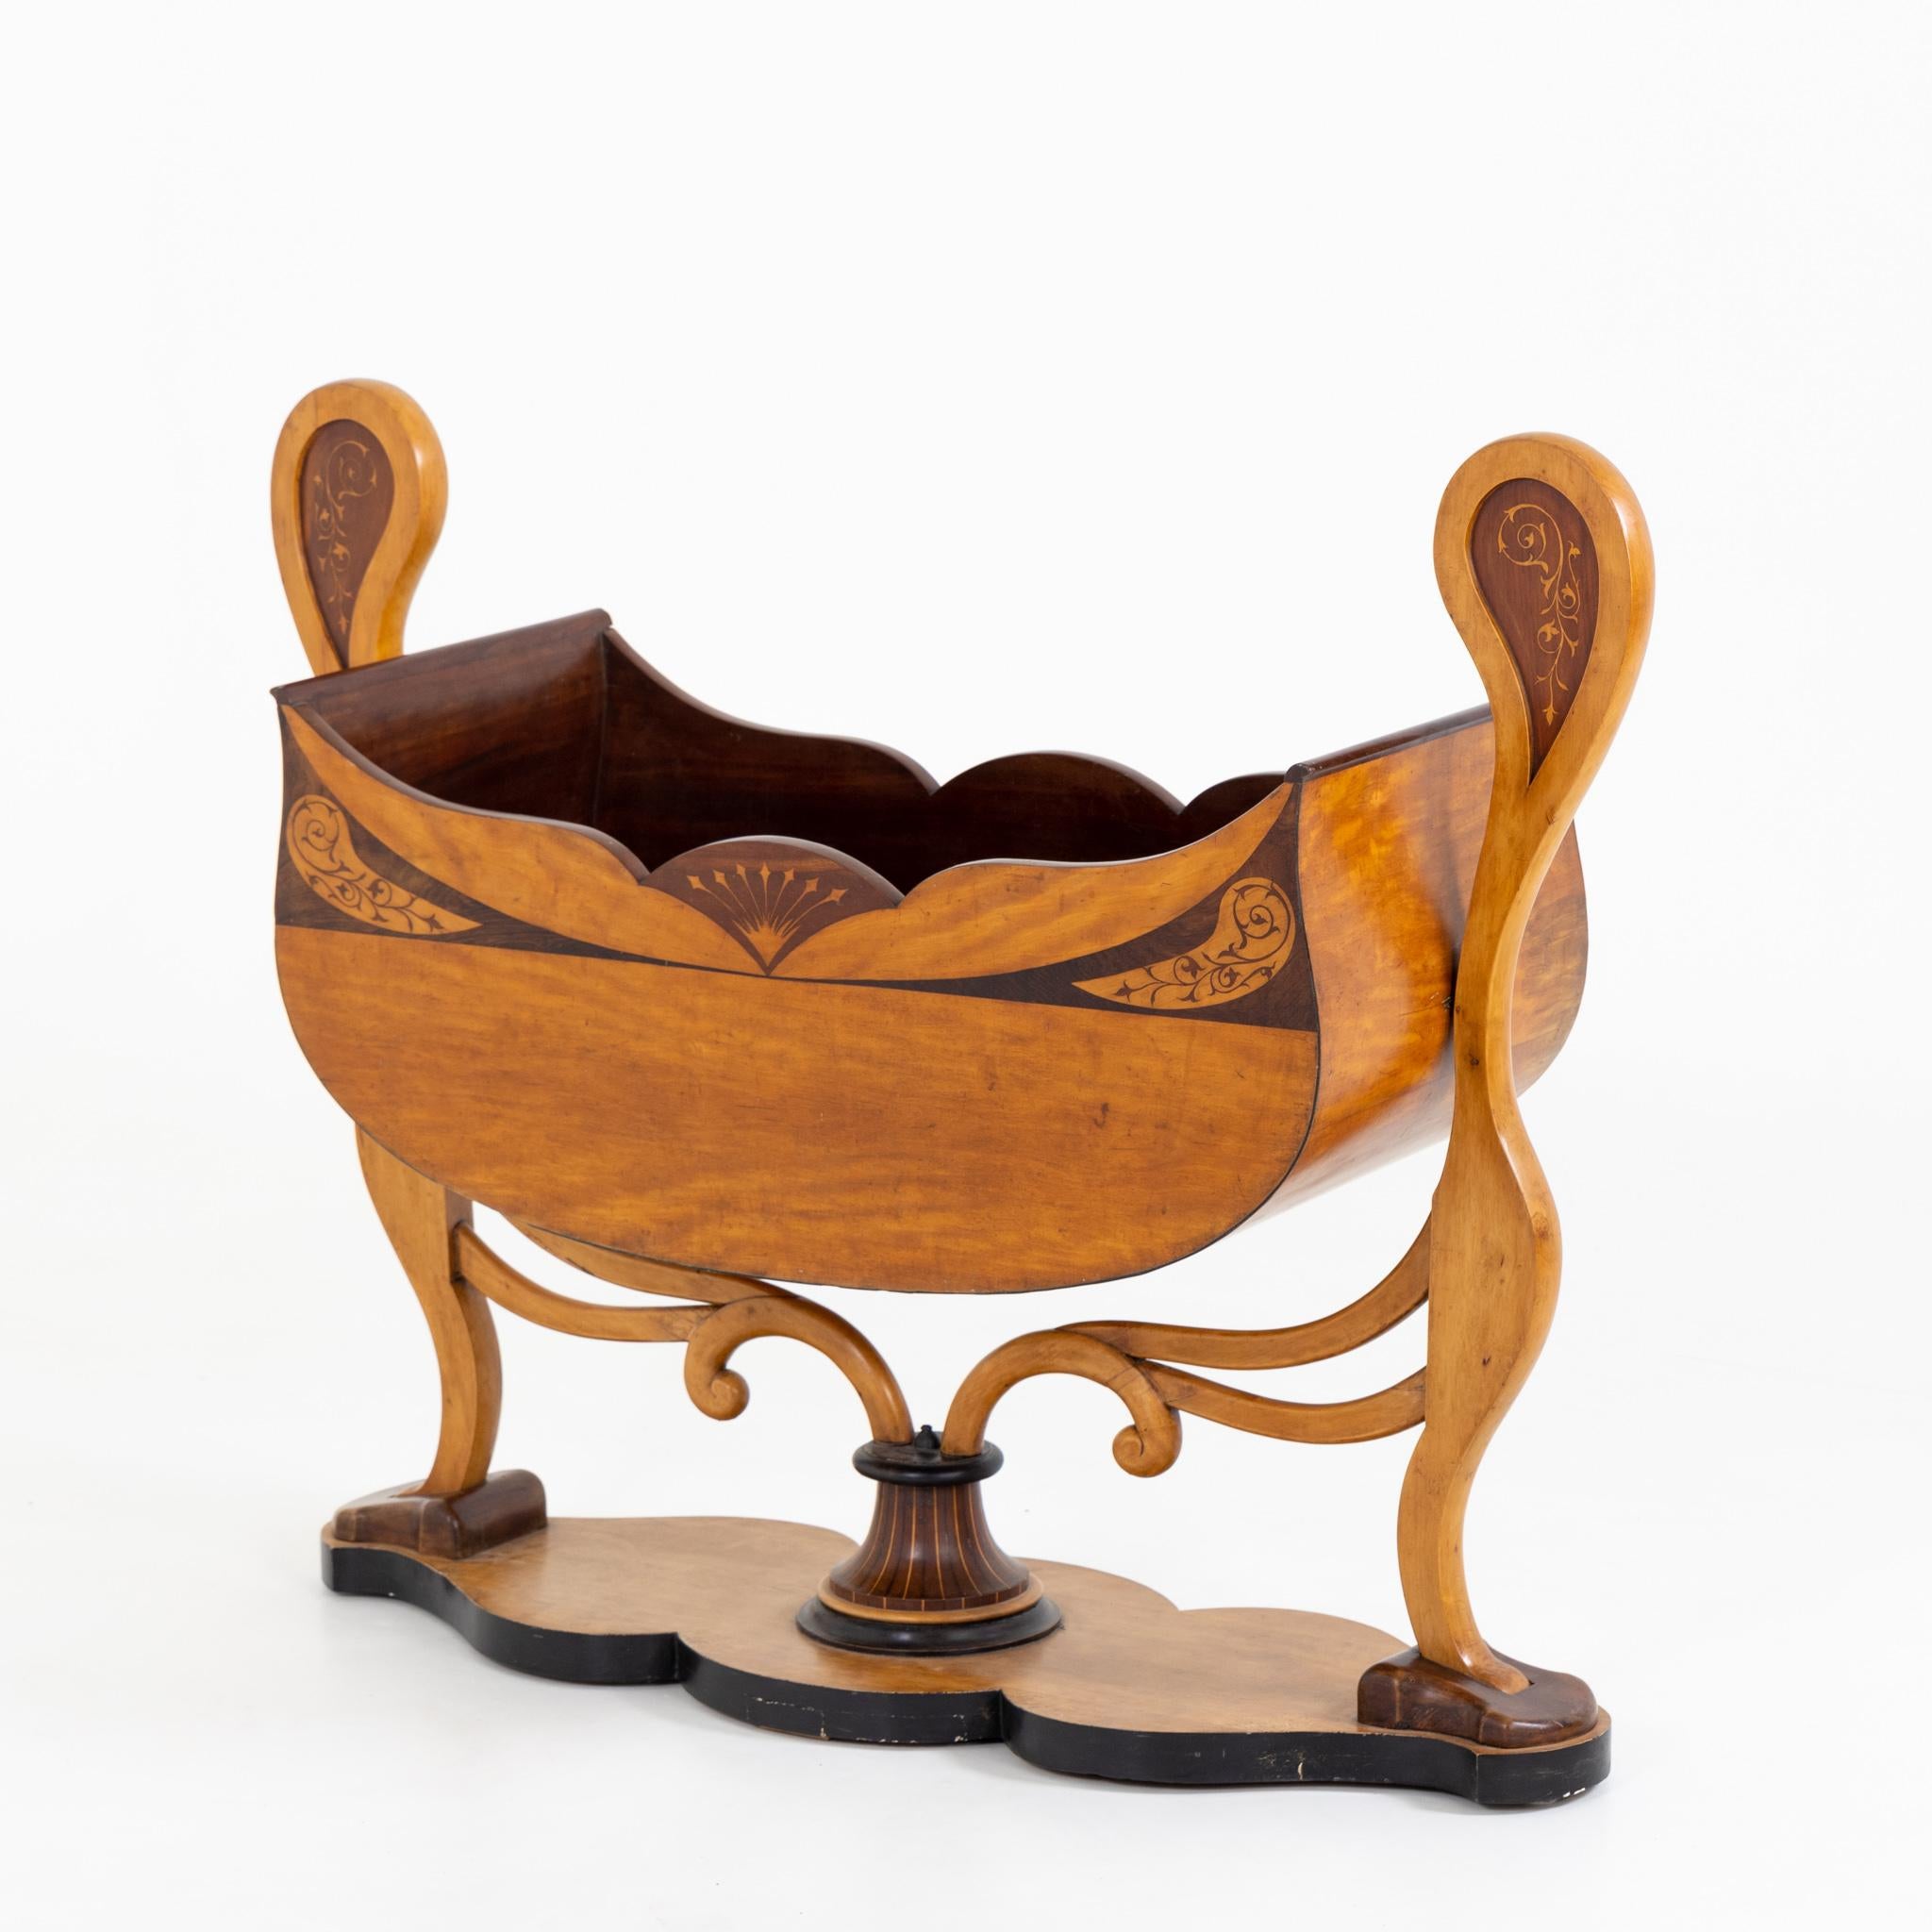 Cradle for children with elegantly curved frame and gondola-shaped bassinet. Very beautiful inlay work in the form of vines.